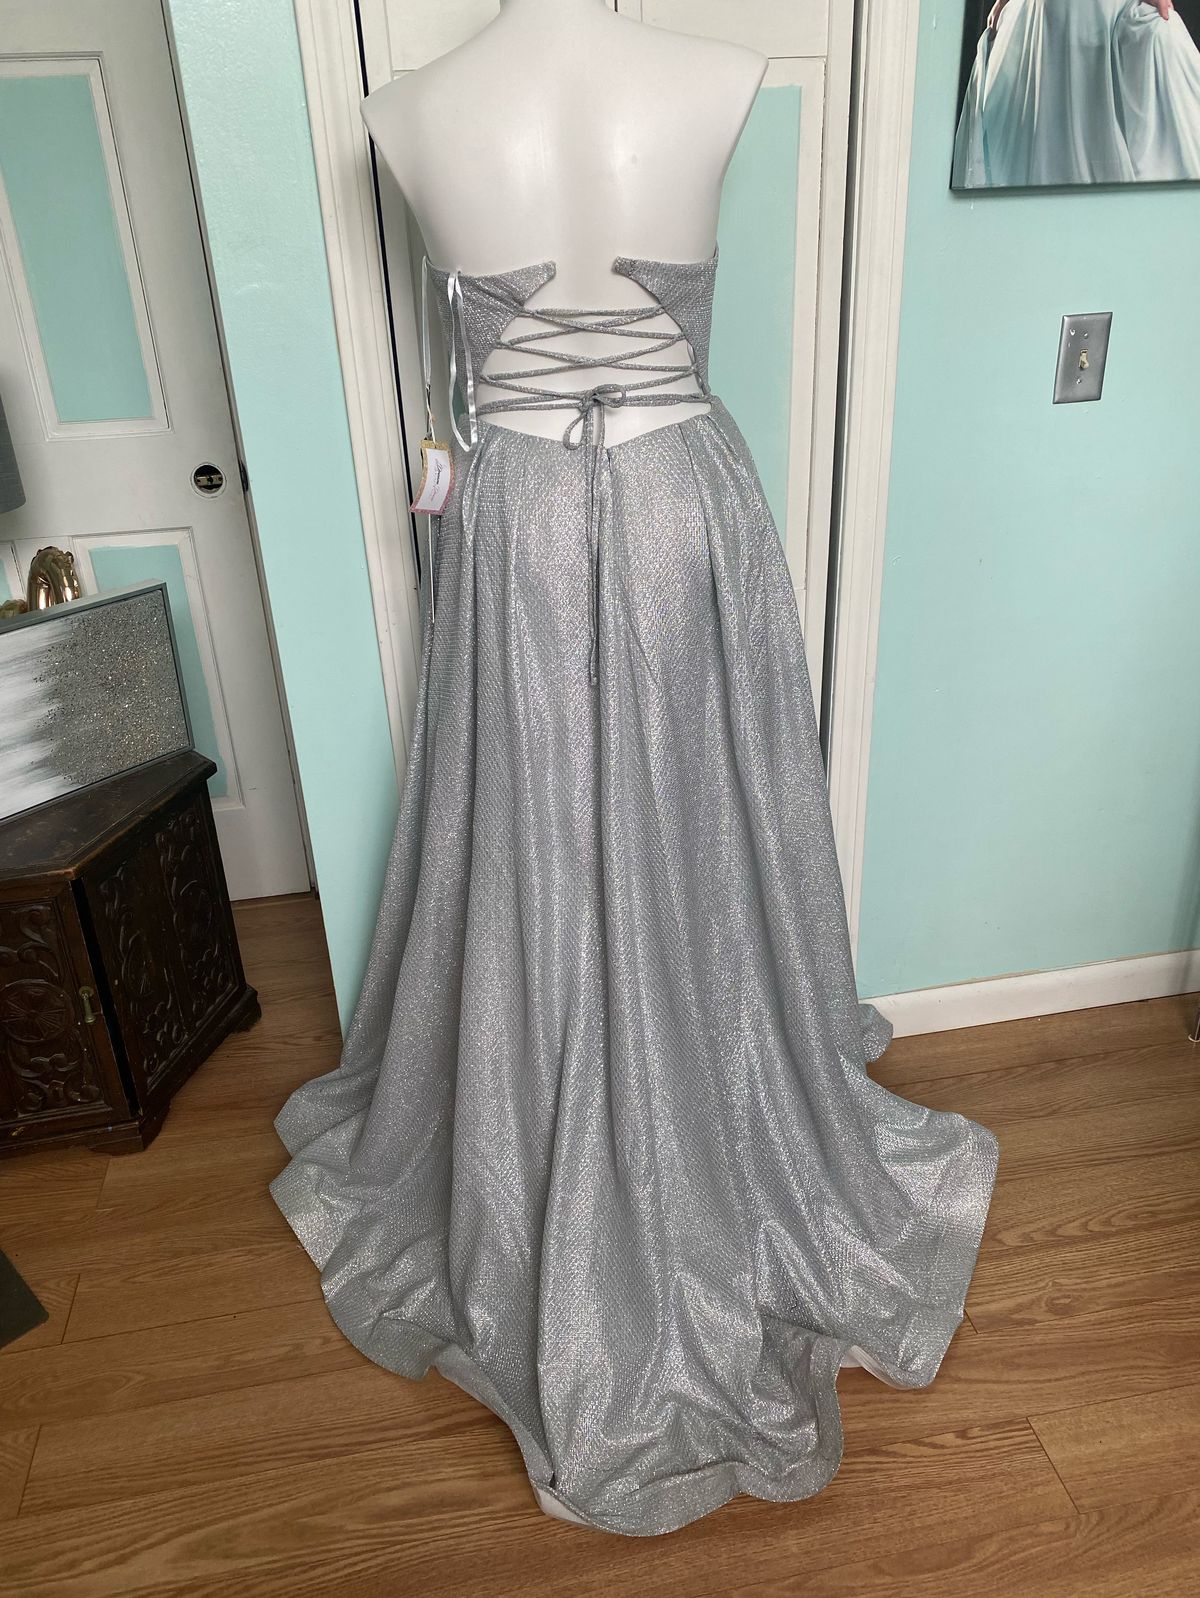 Clarisse Size 12 Prom Silver Ball Gown on Queenly